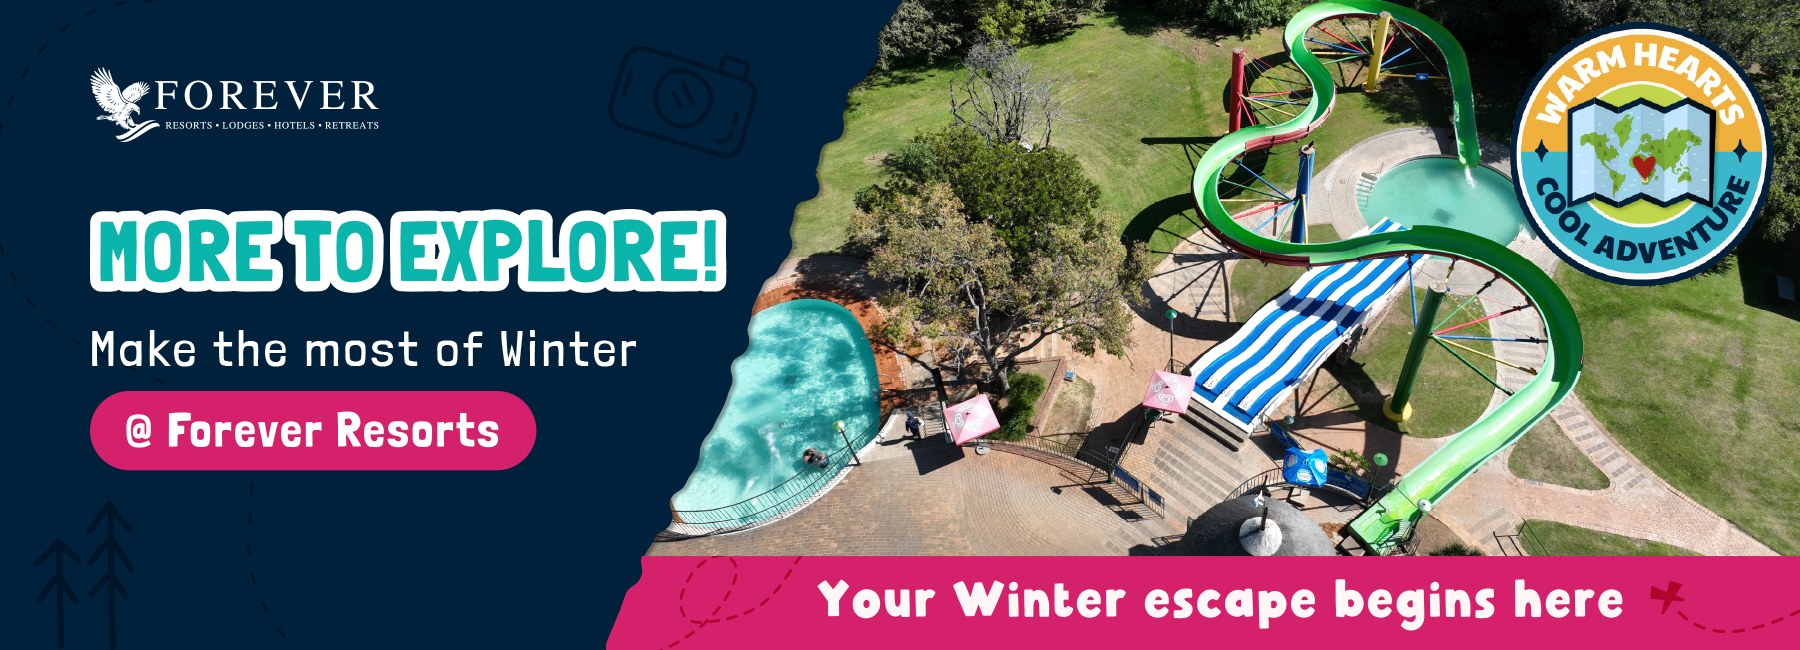 More to explore! Make the most of Winter @ Forever Resorts